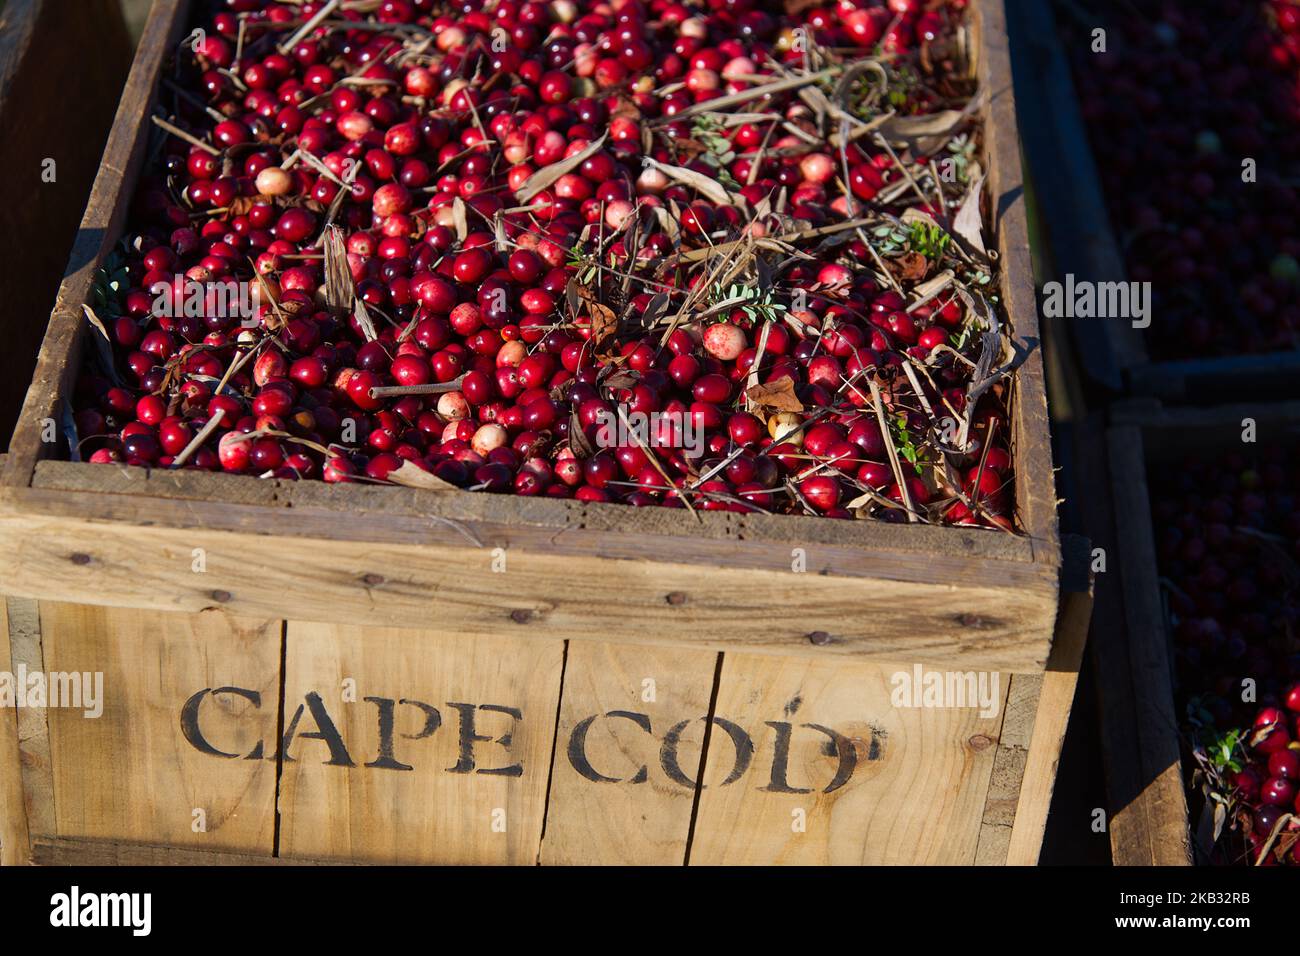 Cranberry Harvest in West Yarmouth, Massachusetts (USA) on Cape Cod. A box of dry harvested cranberries Stock Photo